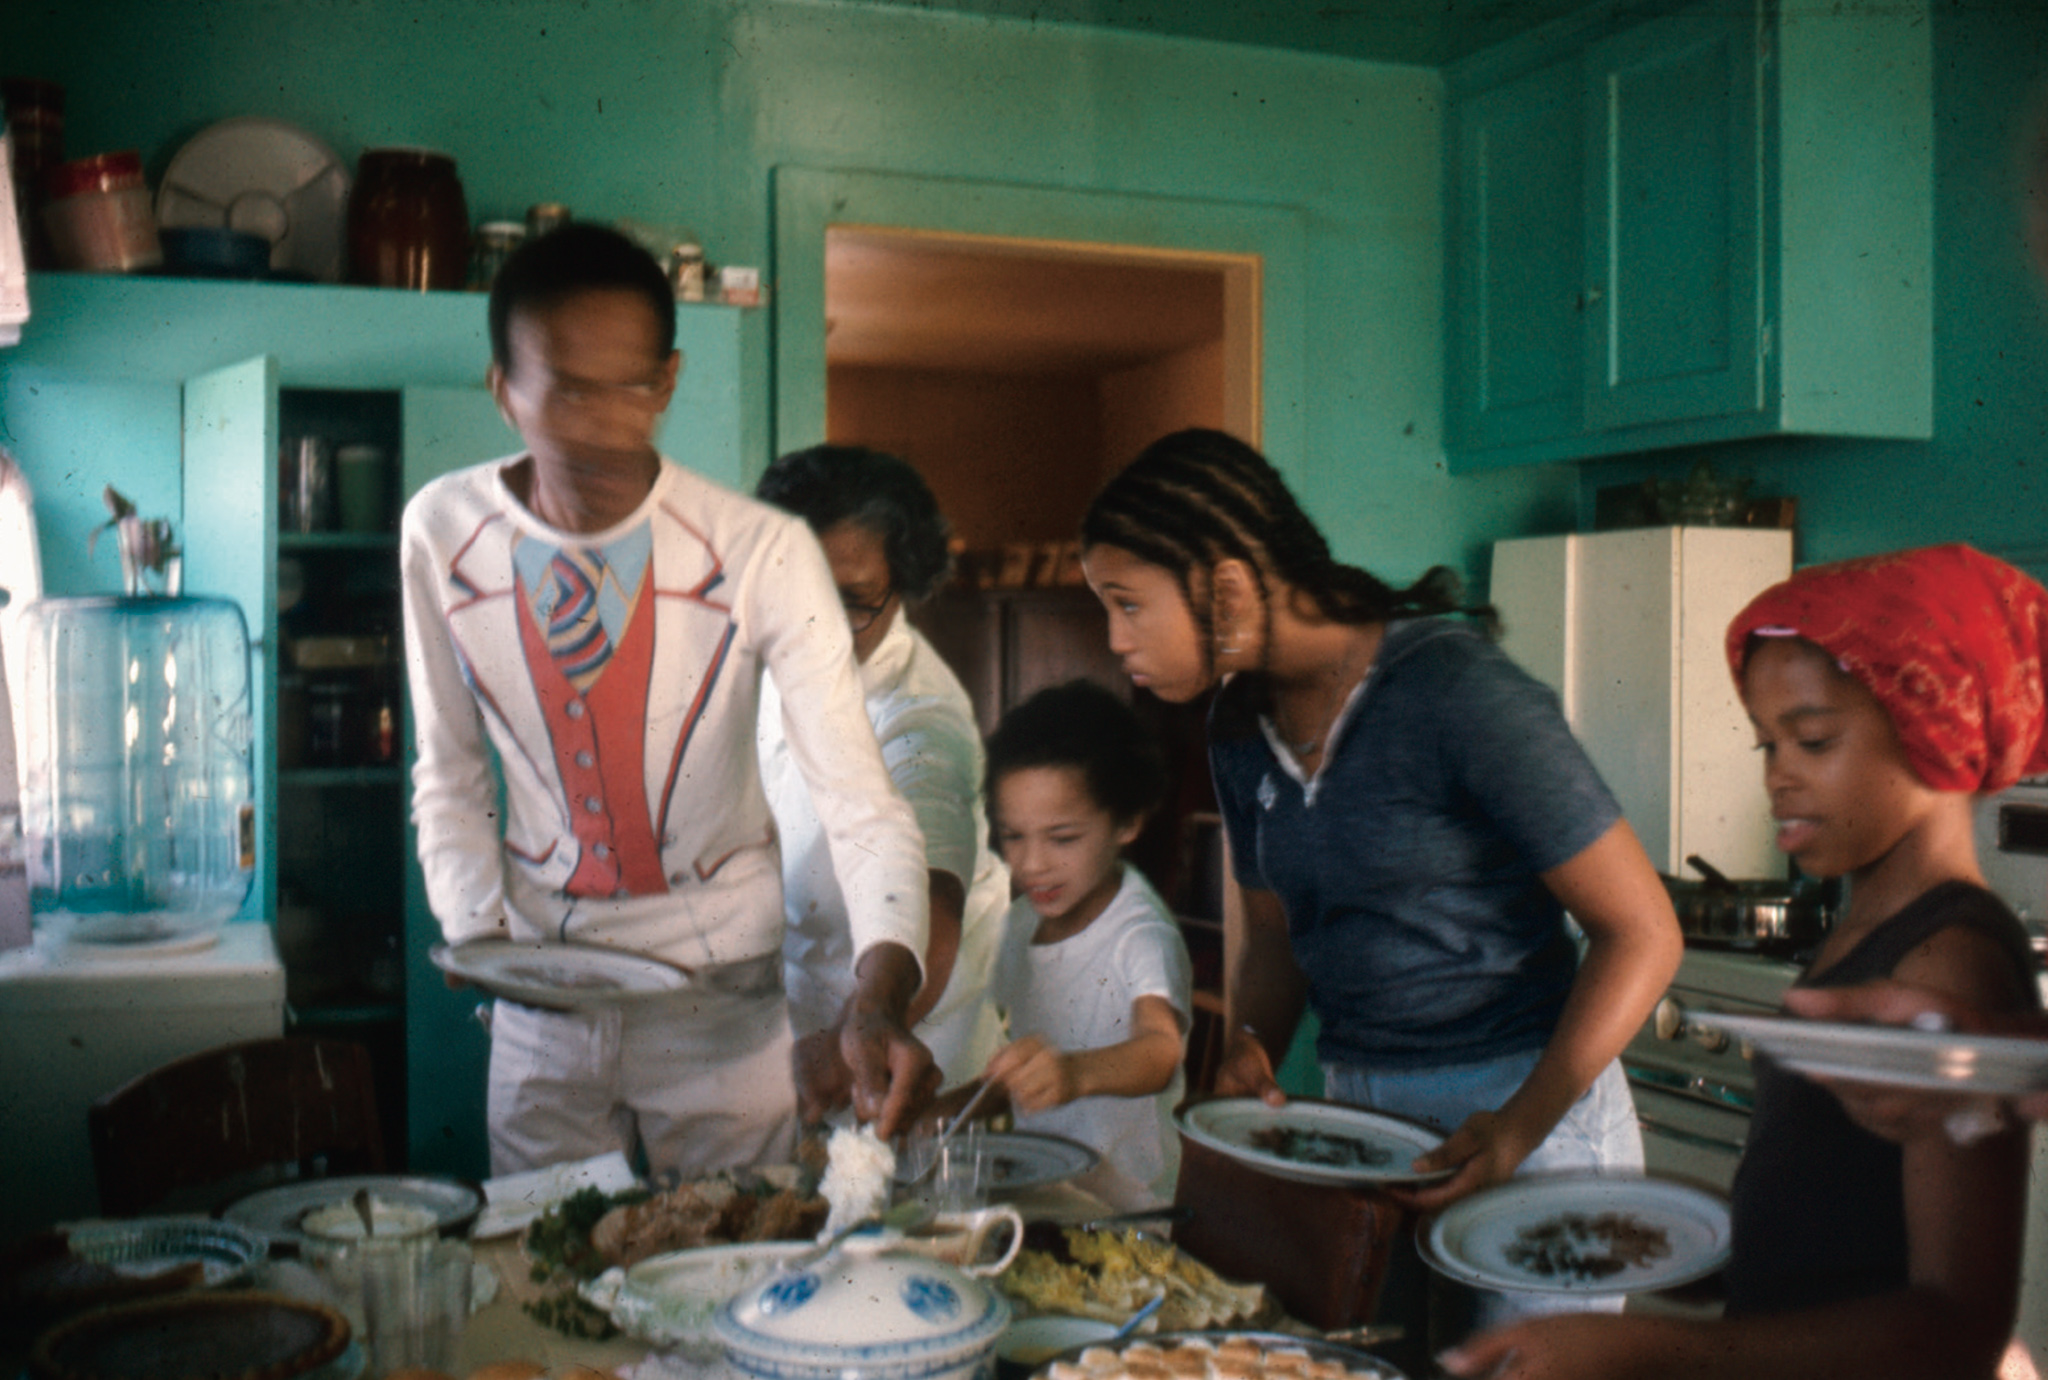 Don Cherry at Daisy Cherry’s house in Watts, Los Angeles, California, ca. 1976. Left to right: Don Cherry, Daisy Cherry, Eagle-Eye Cherry, Neneh Cherry, Lisa Lawrence.